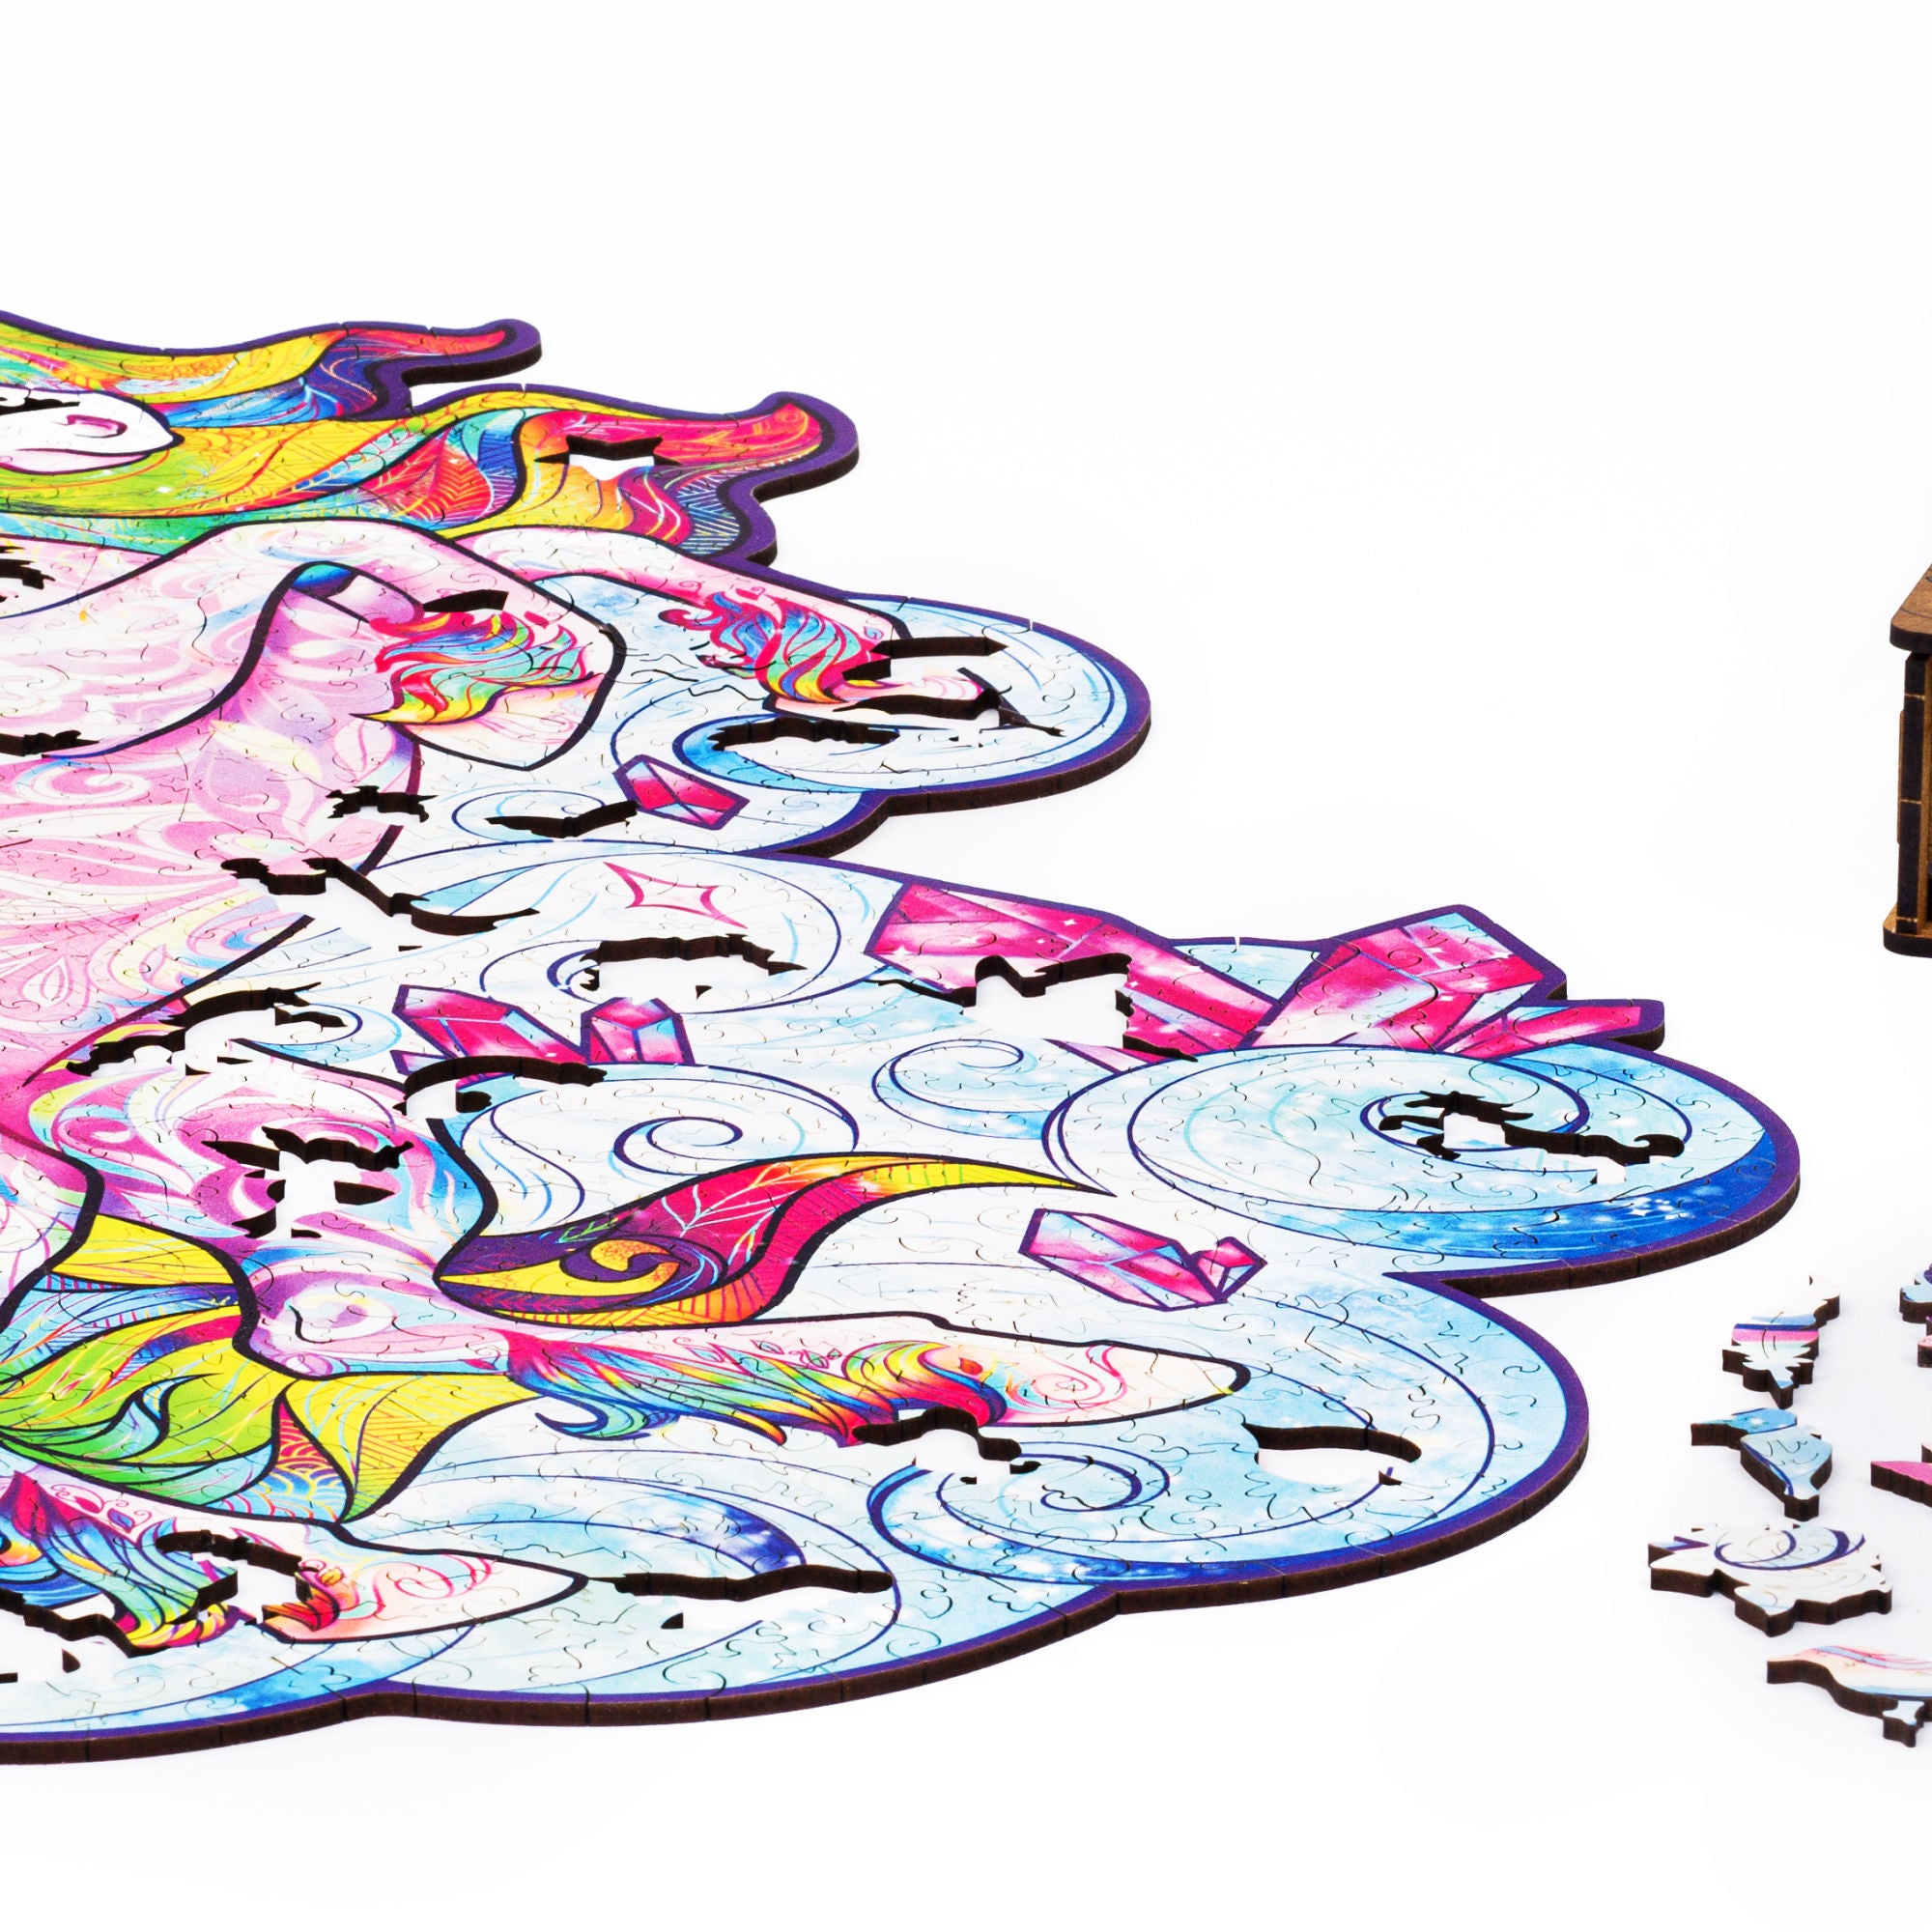 Unidragon Wooden Puzzle Jigsaw, Best Gift for Adults and Kids, Unique Shape  Jigsaw Pieces Inspiring Unicorn, 10.2 x 12.6 in (26 x 32 cm) 195 pcs,  Medium – TopToy